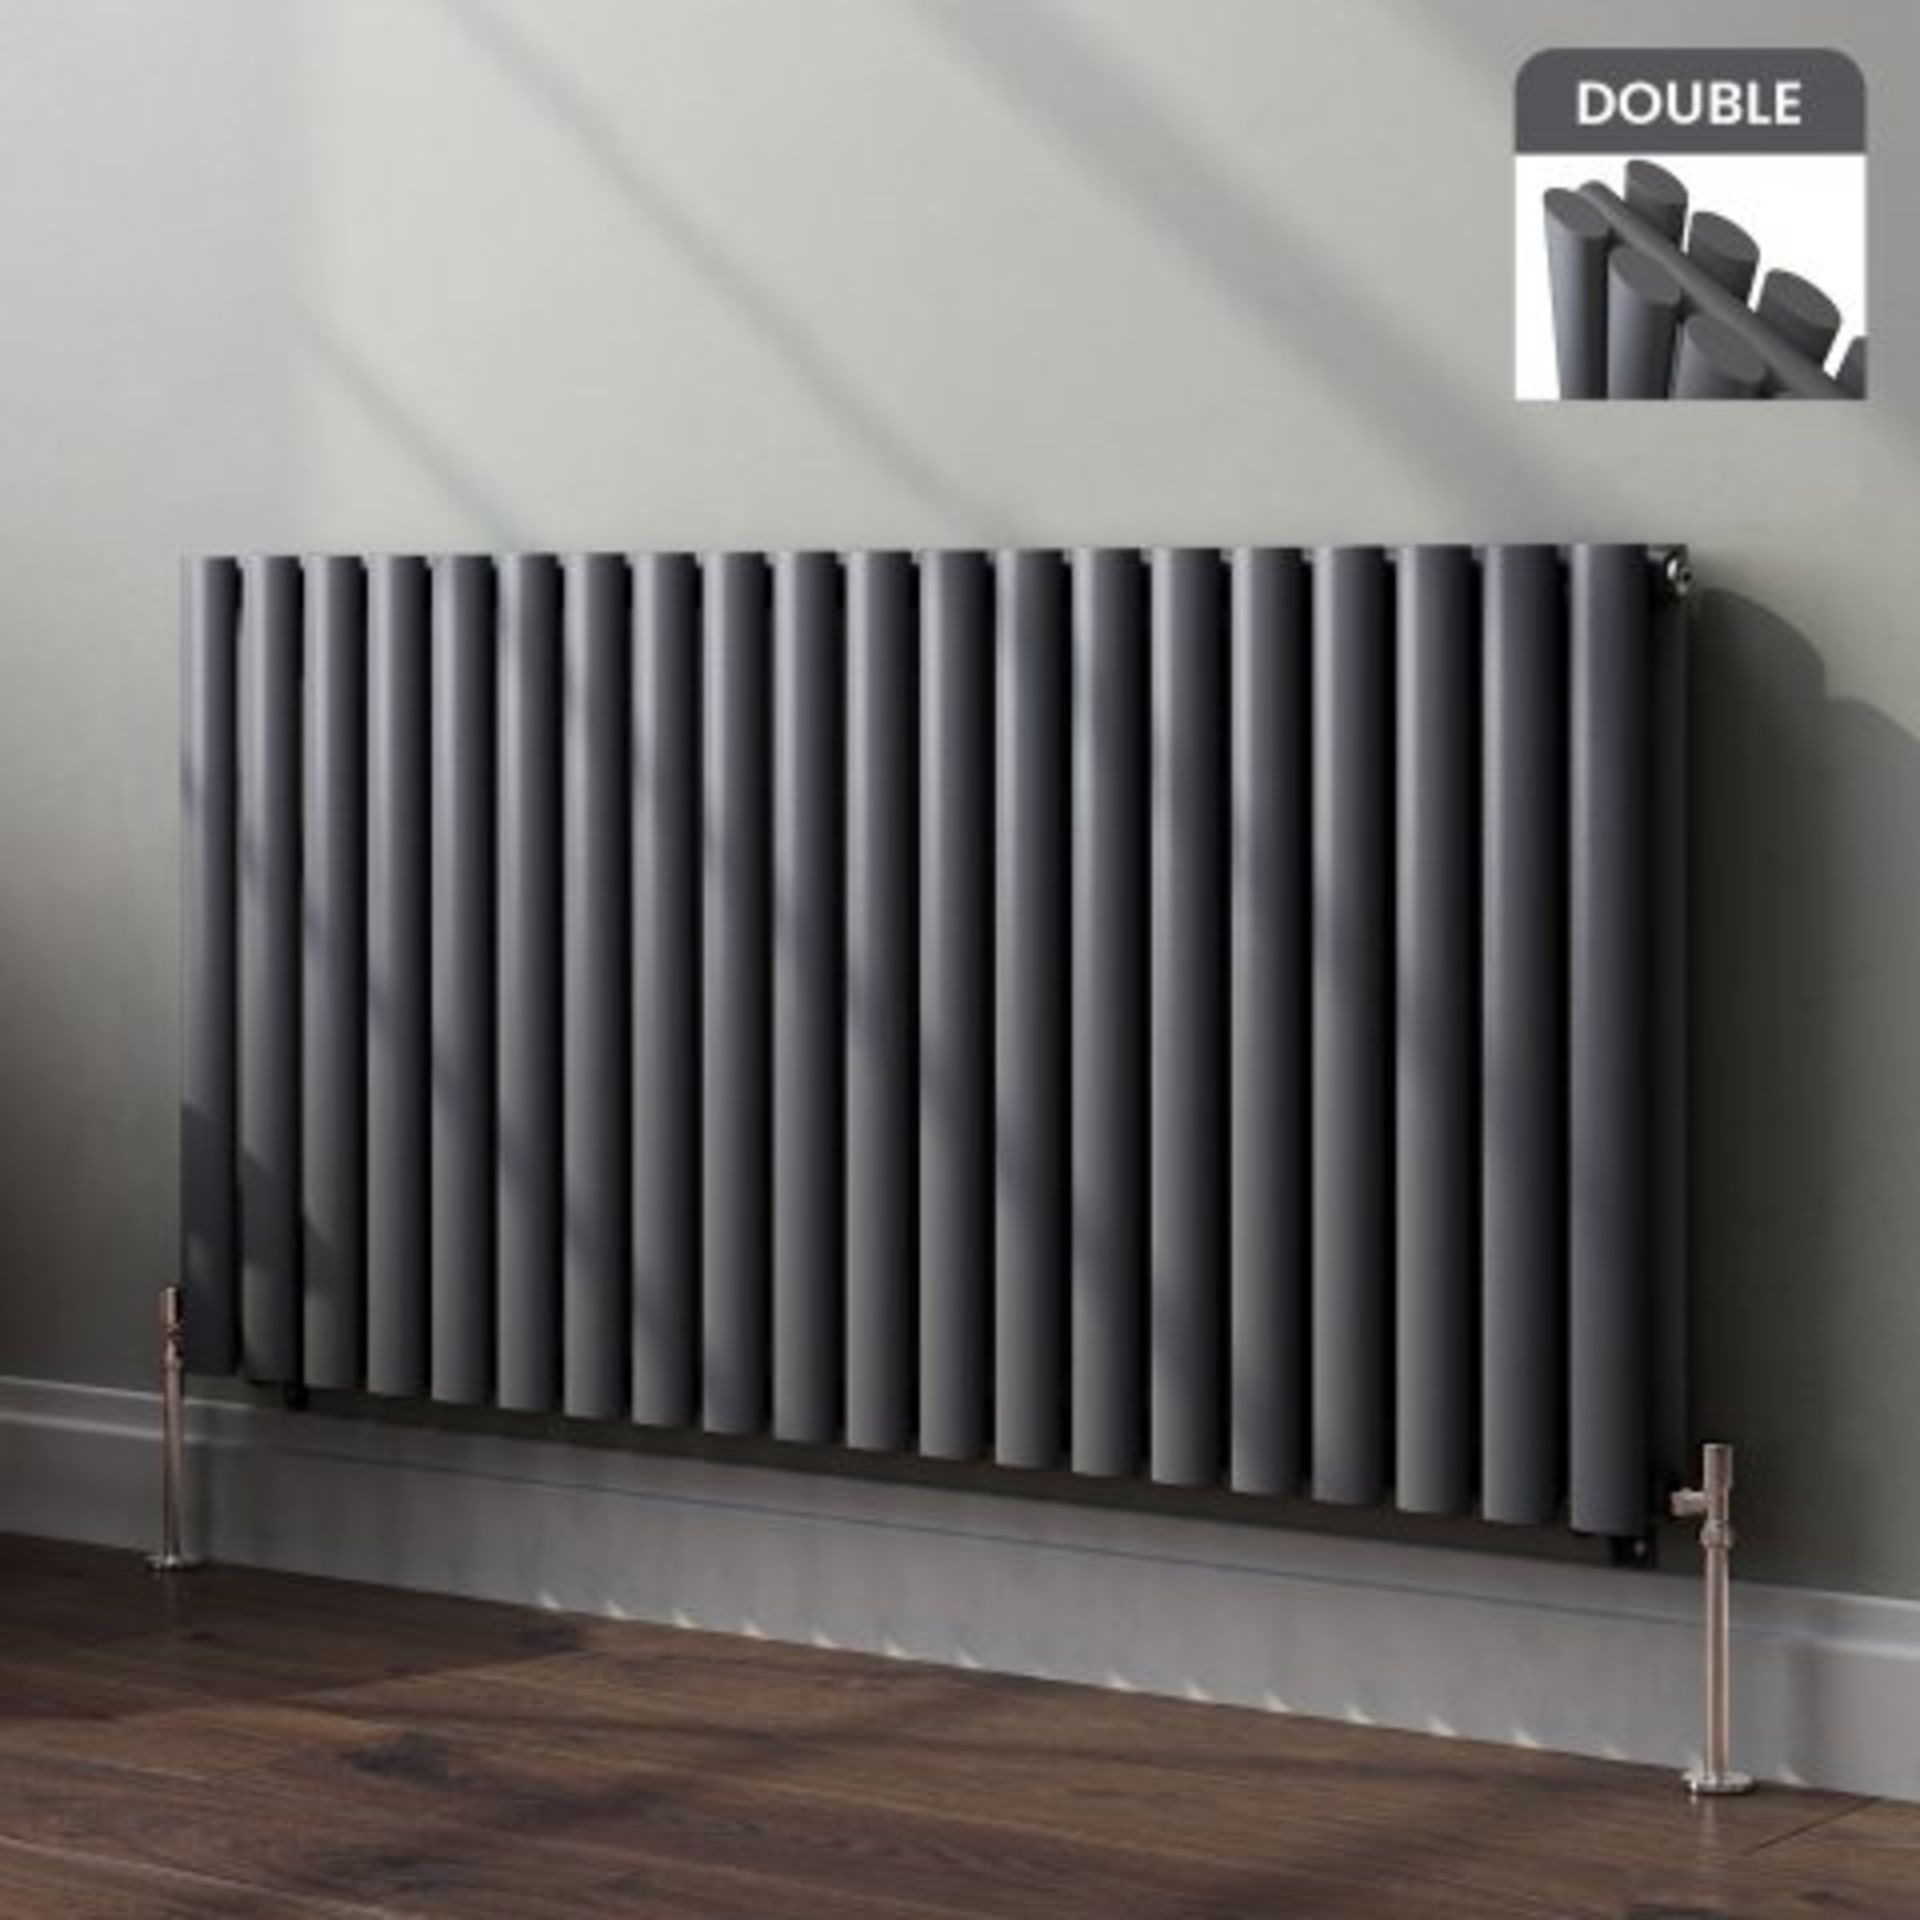 (A9) 600x1200mm Anthracite Double Panel Oval Tube Horizontal Radiator - Huntington Finest. RRP £